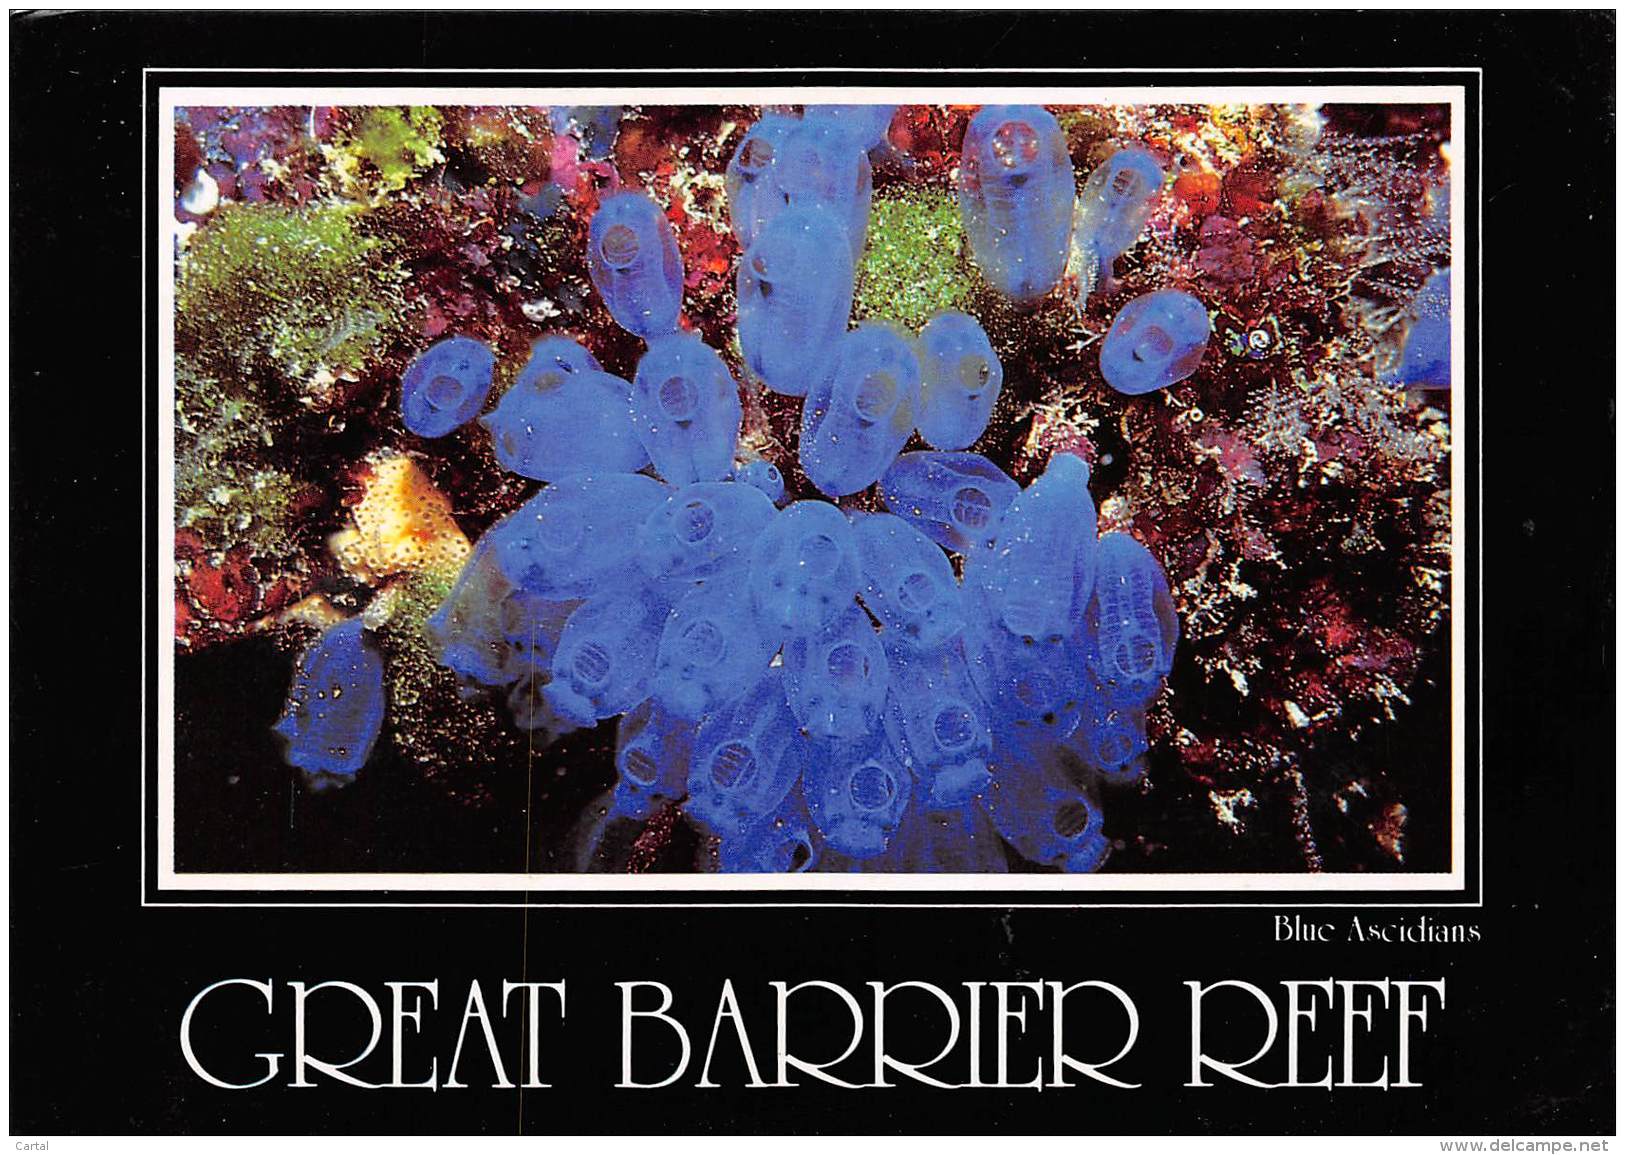 CPM - GREAT BARRIER REEF - Blue Ascidians Displaying Their Delicate Beauty. - Great Barrier Reef